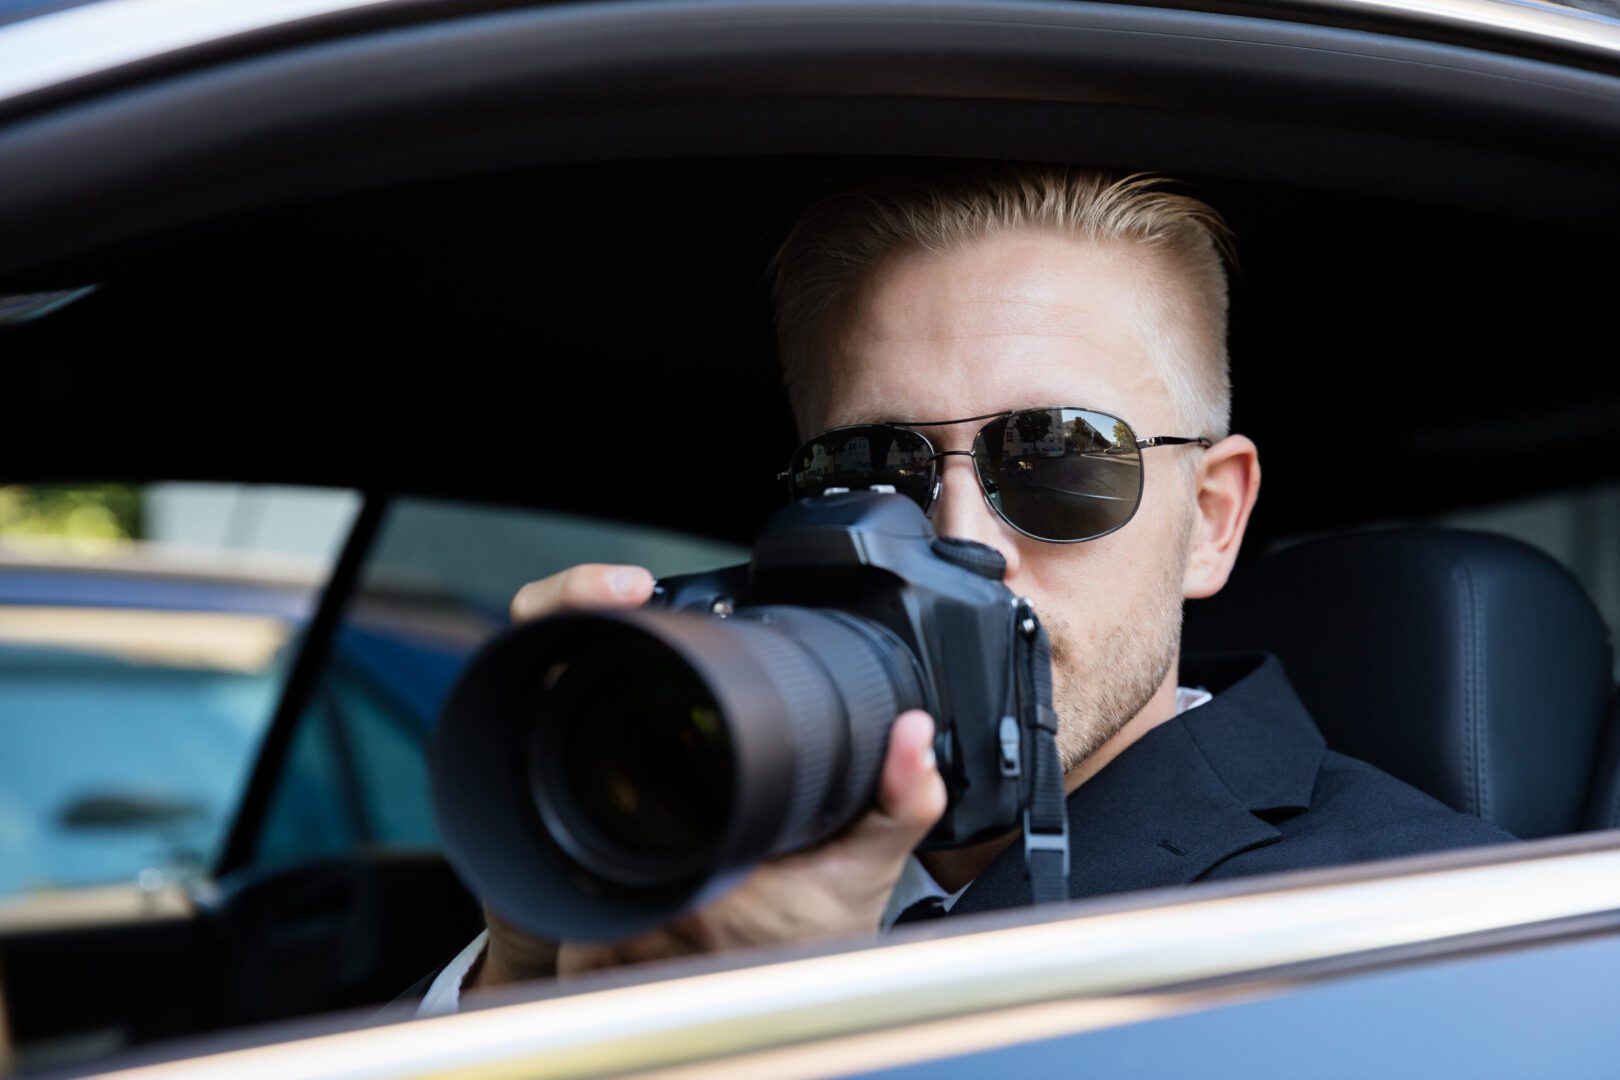 A man in sunglasses holding a camera while sitting inside of a car.